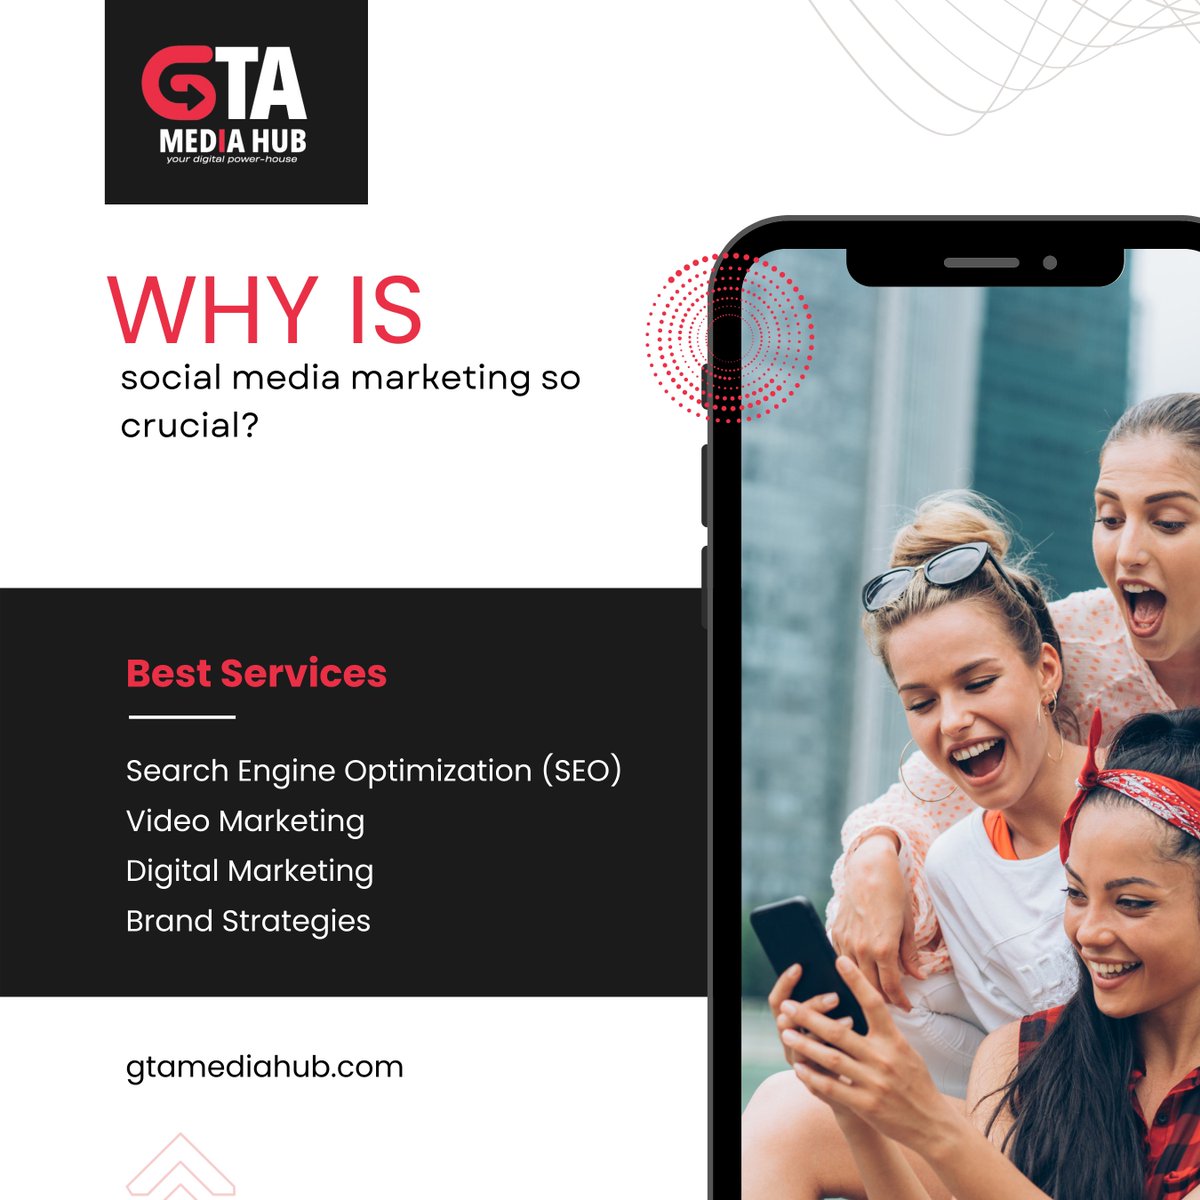 Why is social media marketing so crucial?

Follow the page now to know more!

#sociamedia #sociamediamarketing #sociamediatips #sociamediamanagement #sociamediastrategy #sociamediasucces #sociamediaagency #sociamediamanegemt #SociaMediaPromotions #sociamediatrends #gtamediahub